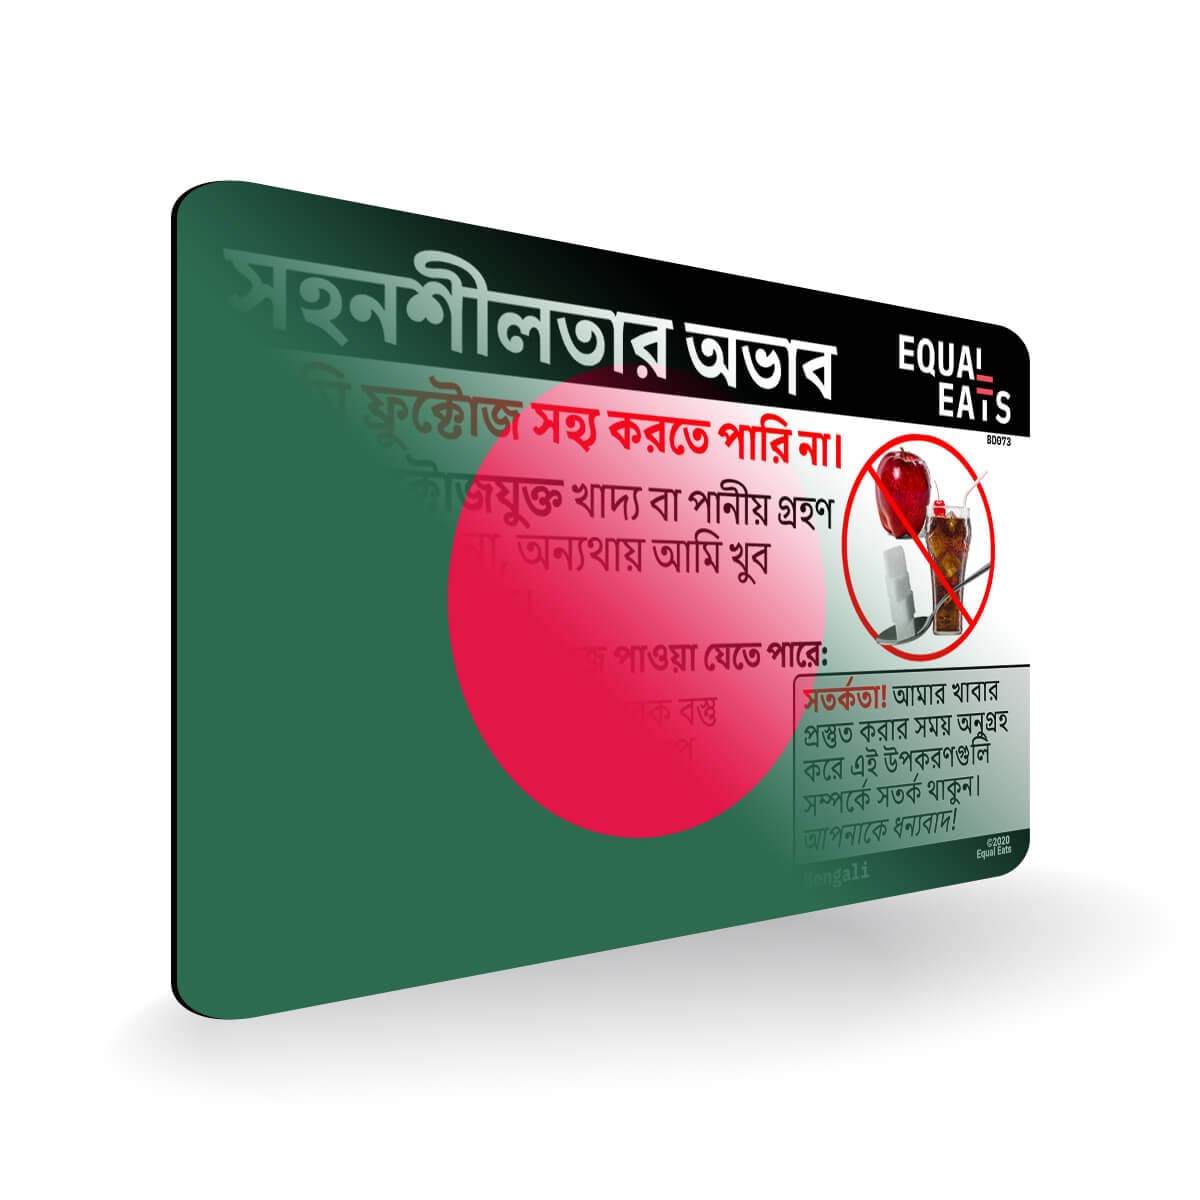 Fructose Intolerance in Bengali. Fructose Intolerant Card for Bangladesh